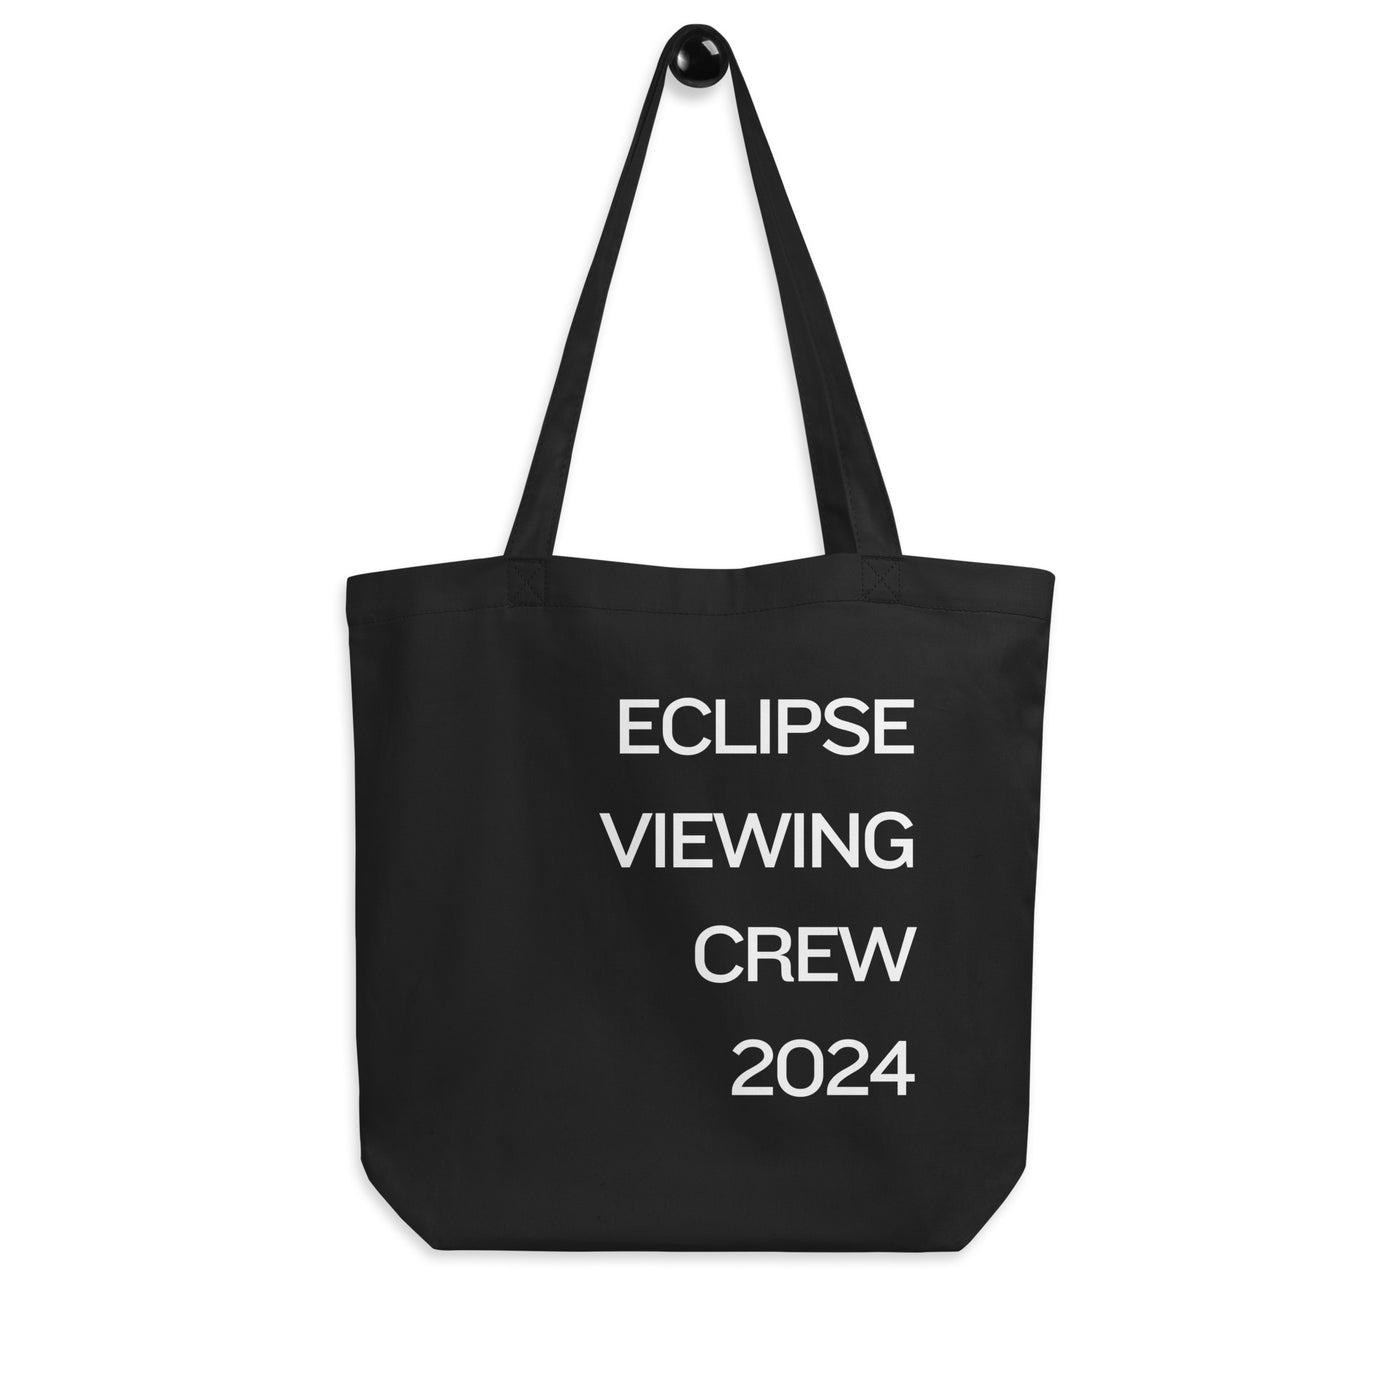 Eclipse Viewing Crew Eco Tote Bag